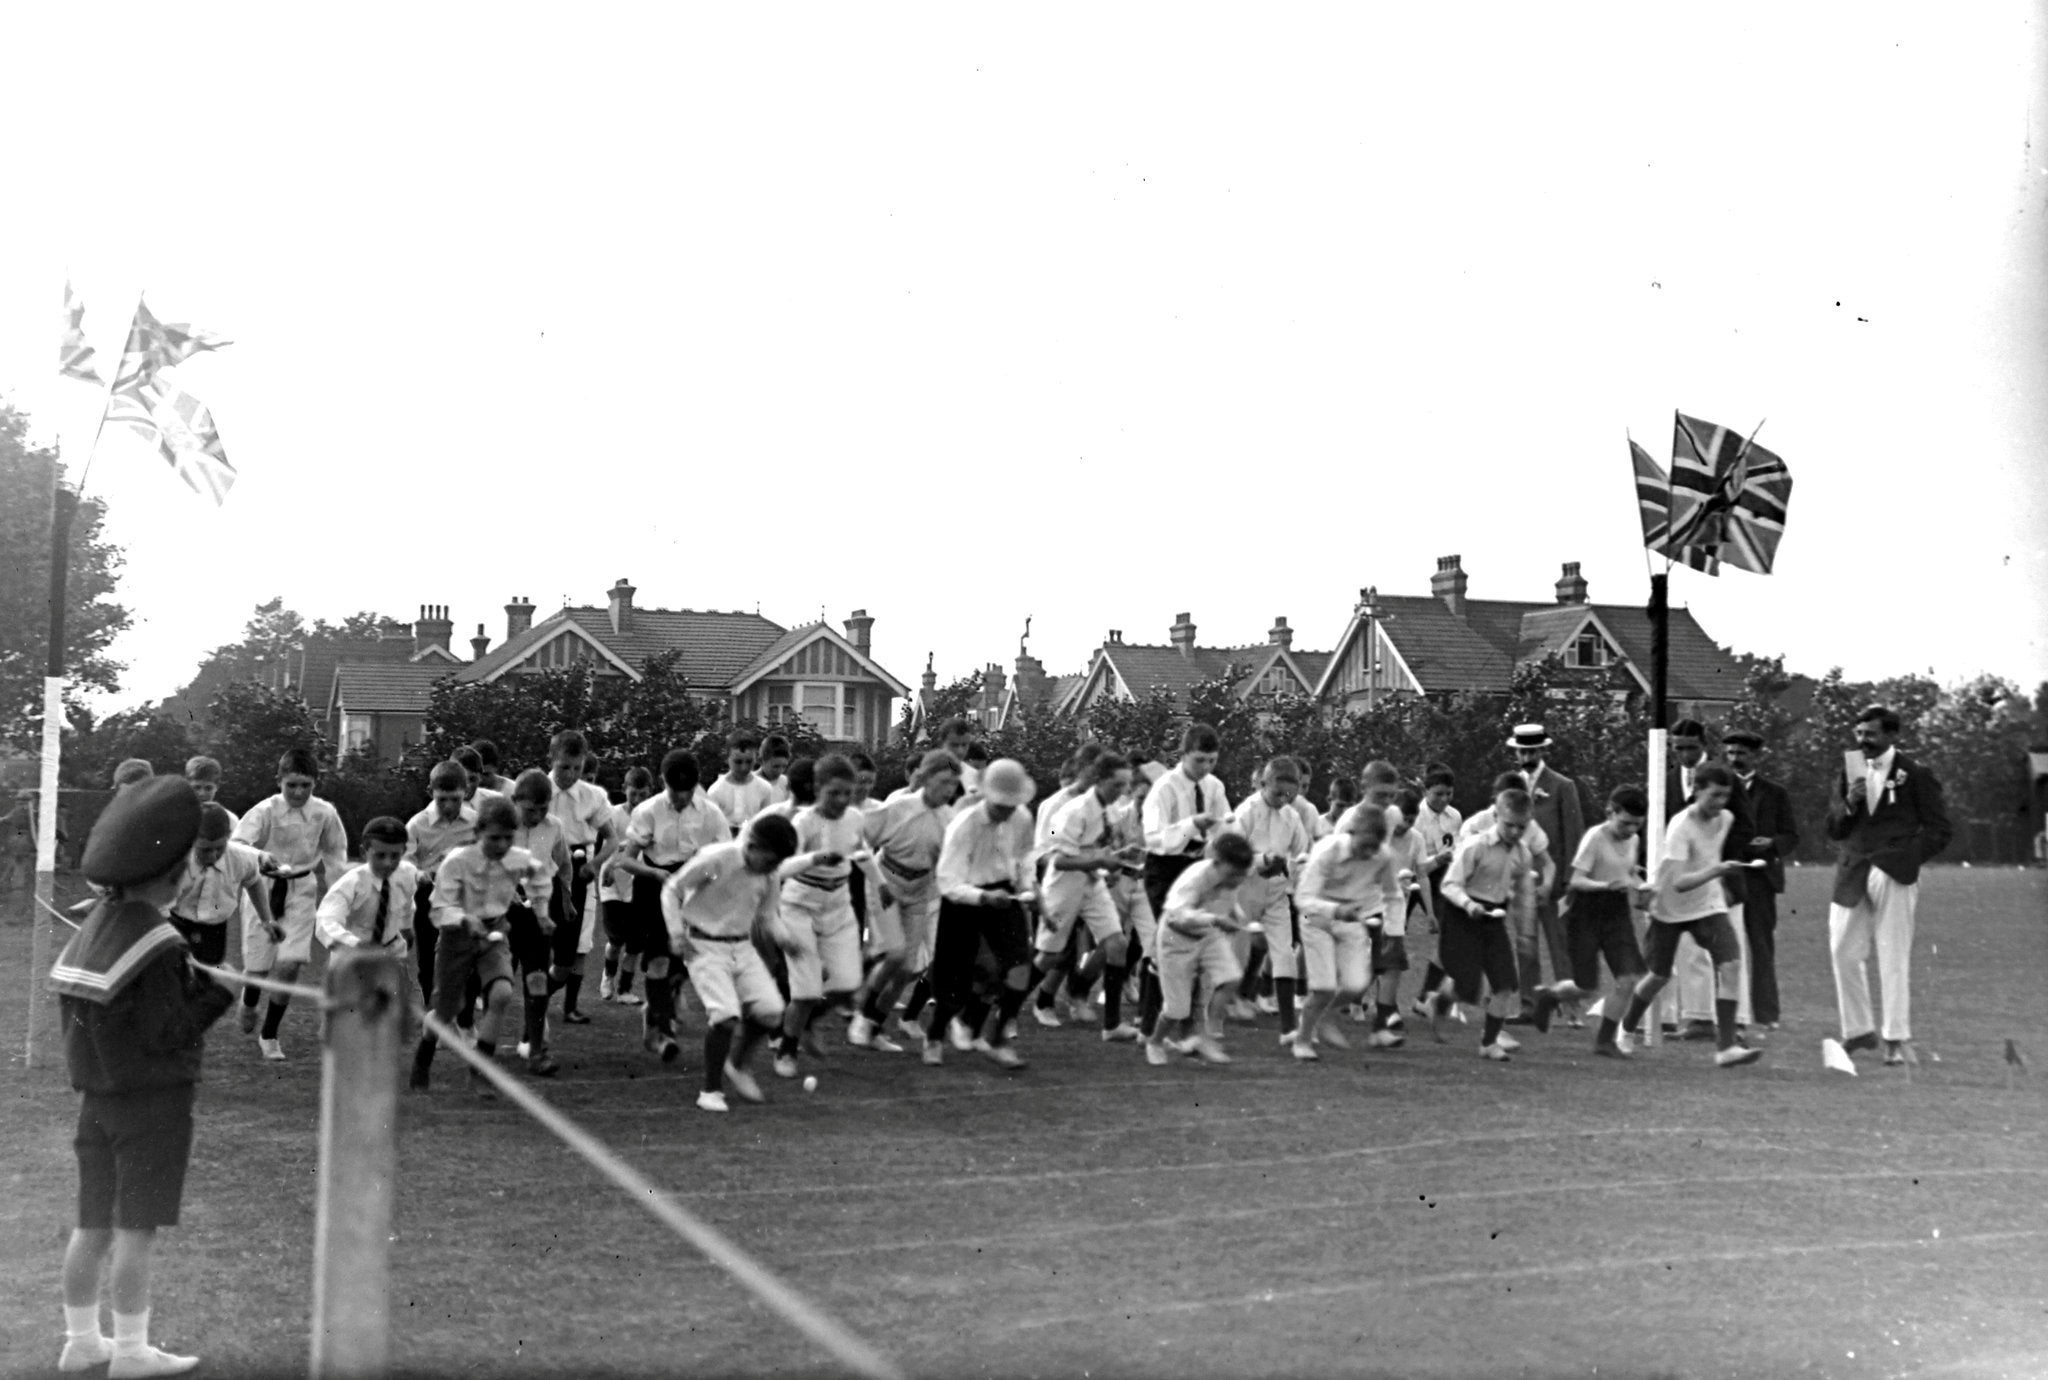 The egg and spoon race on sports day at Holyrood school, Bognor